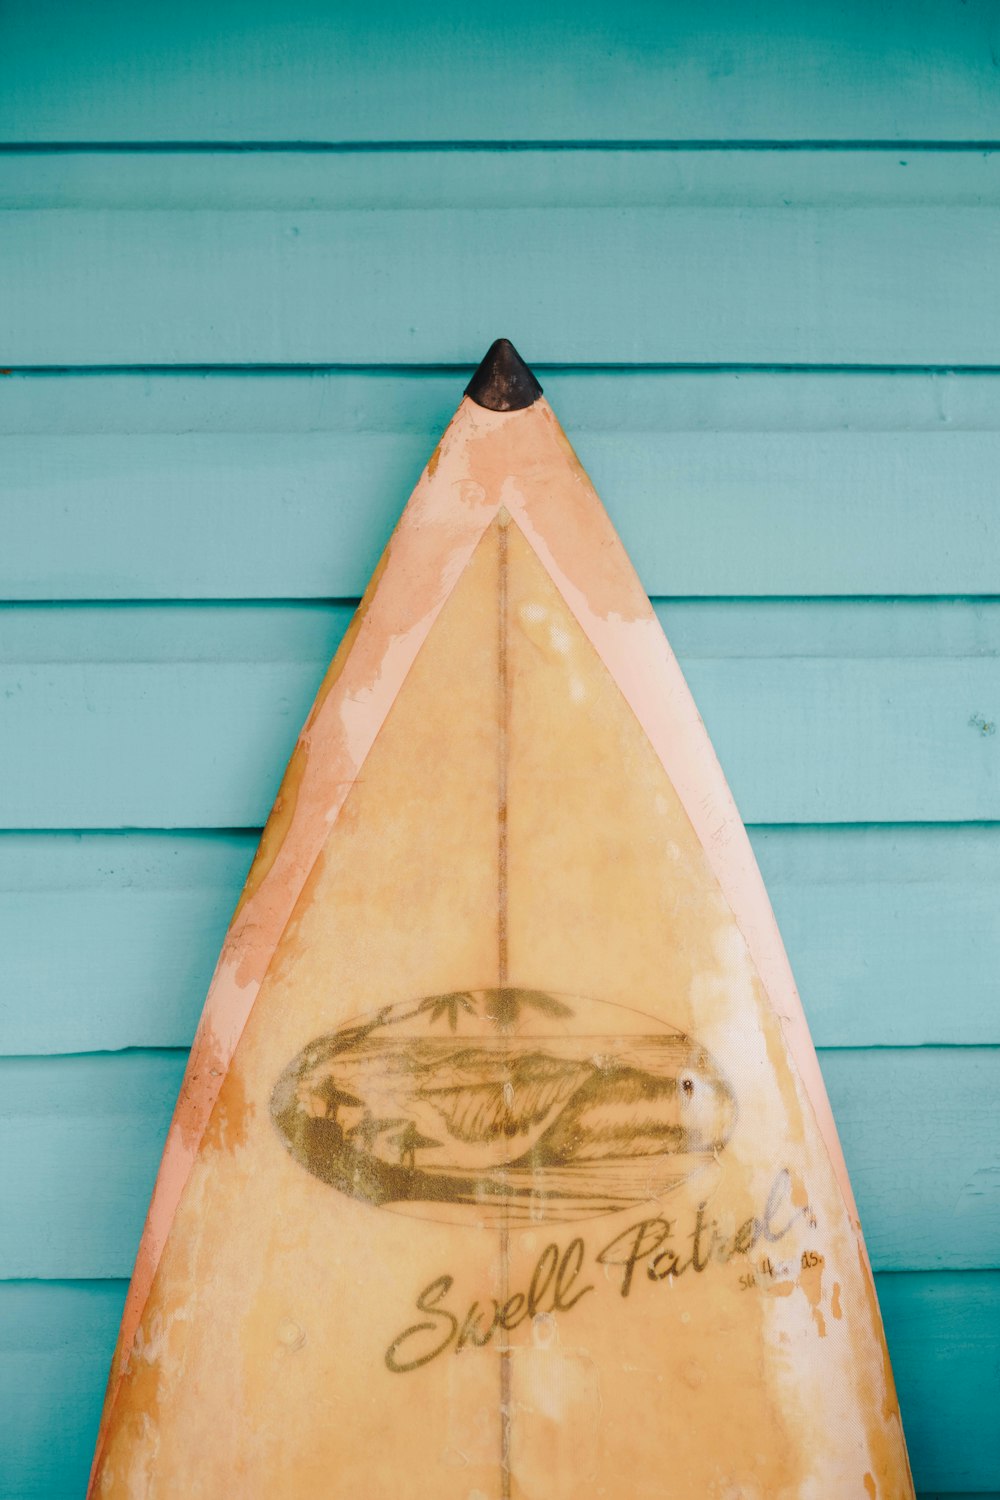 a surfboard leaning up against a blue wall